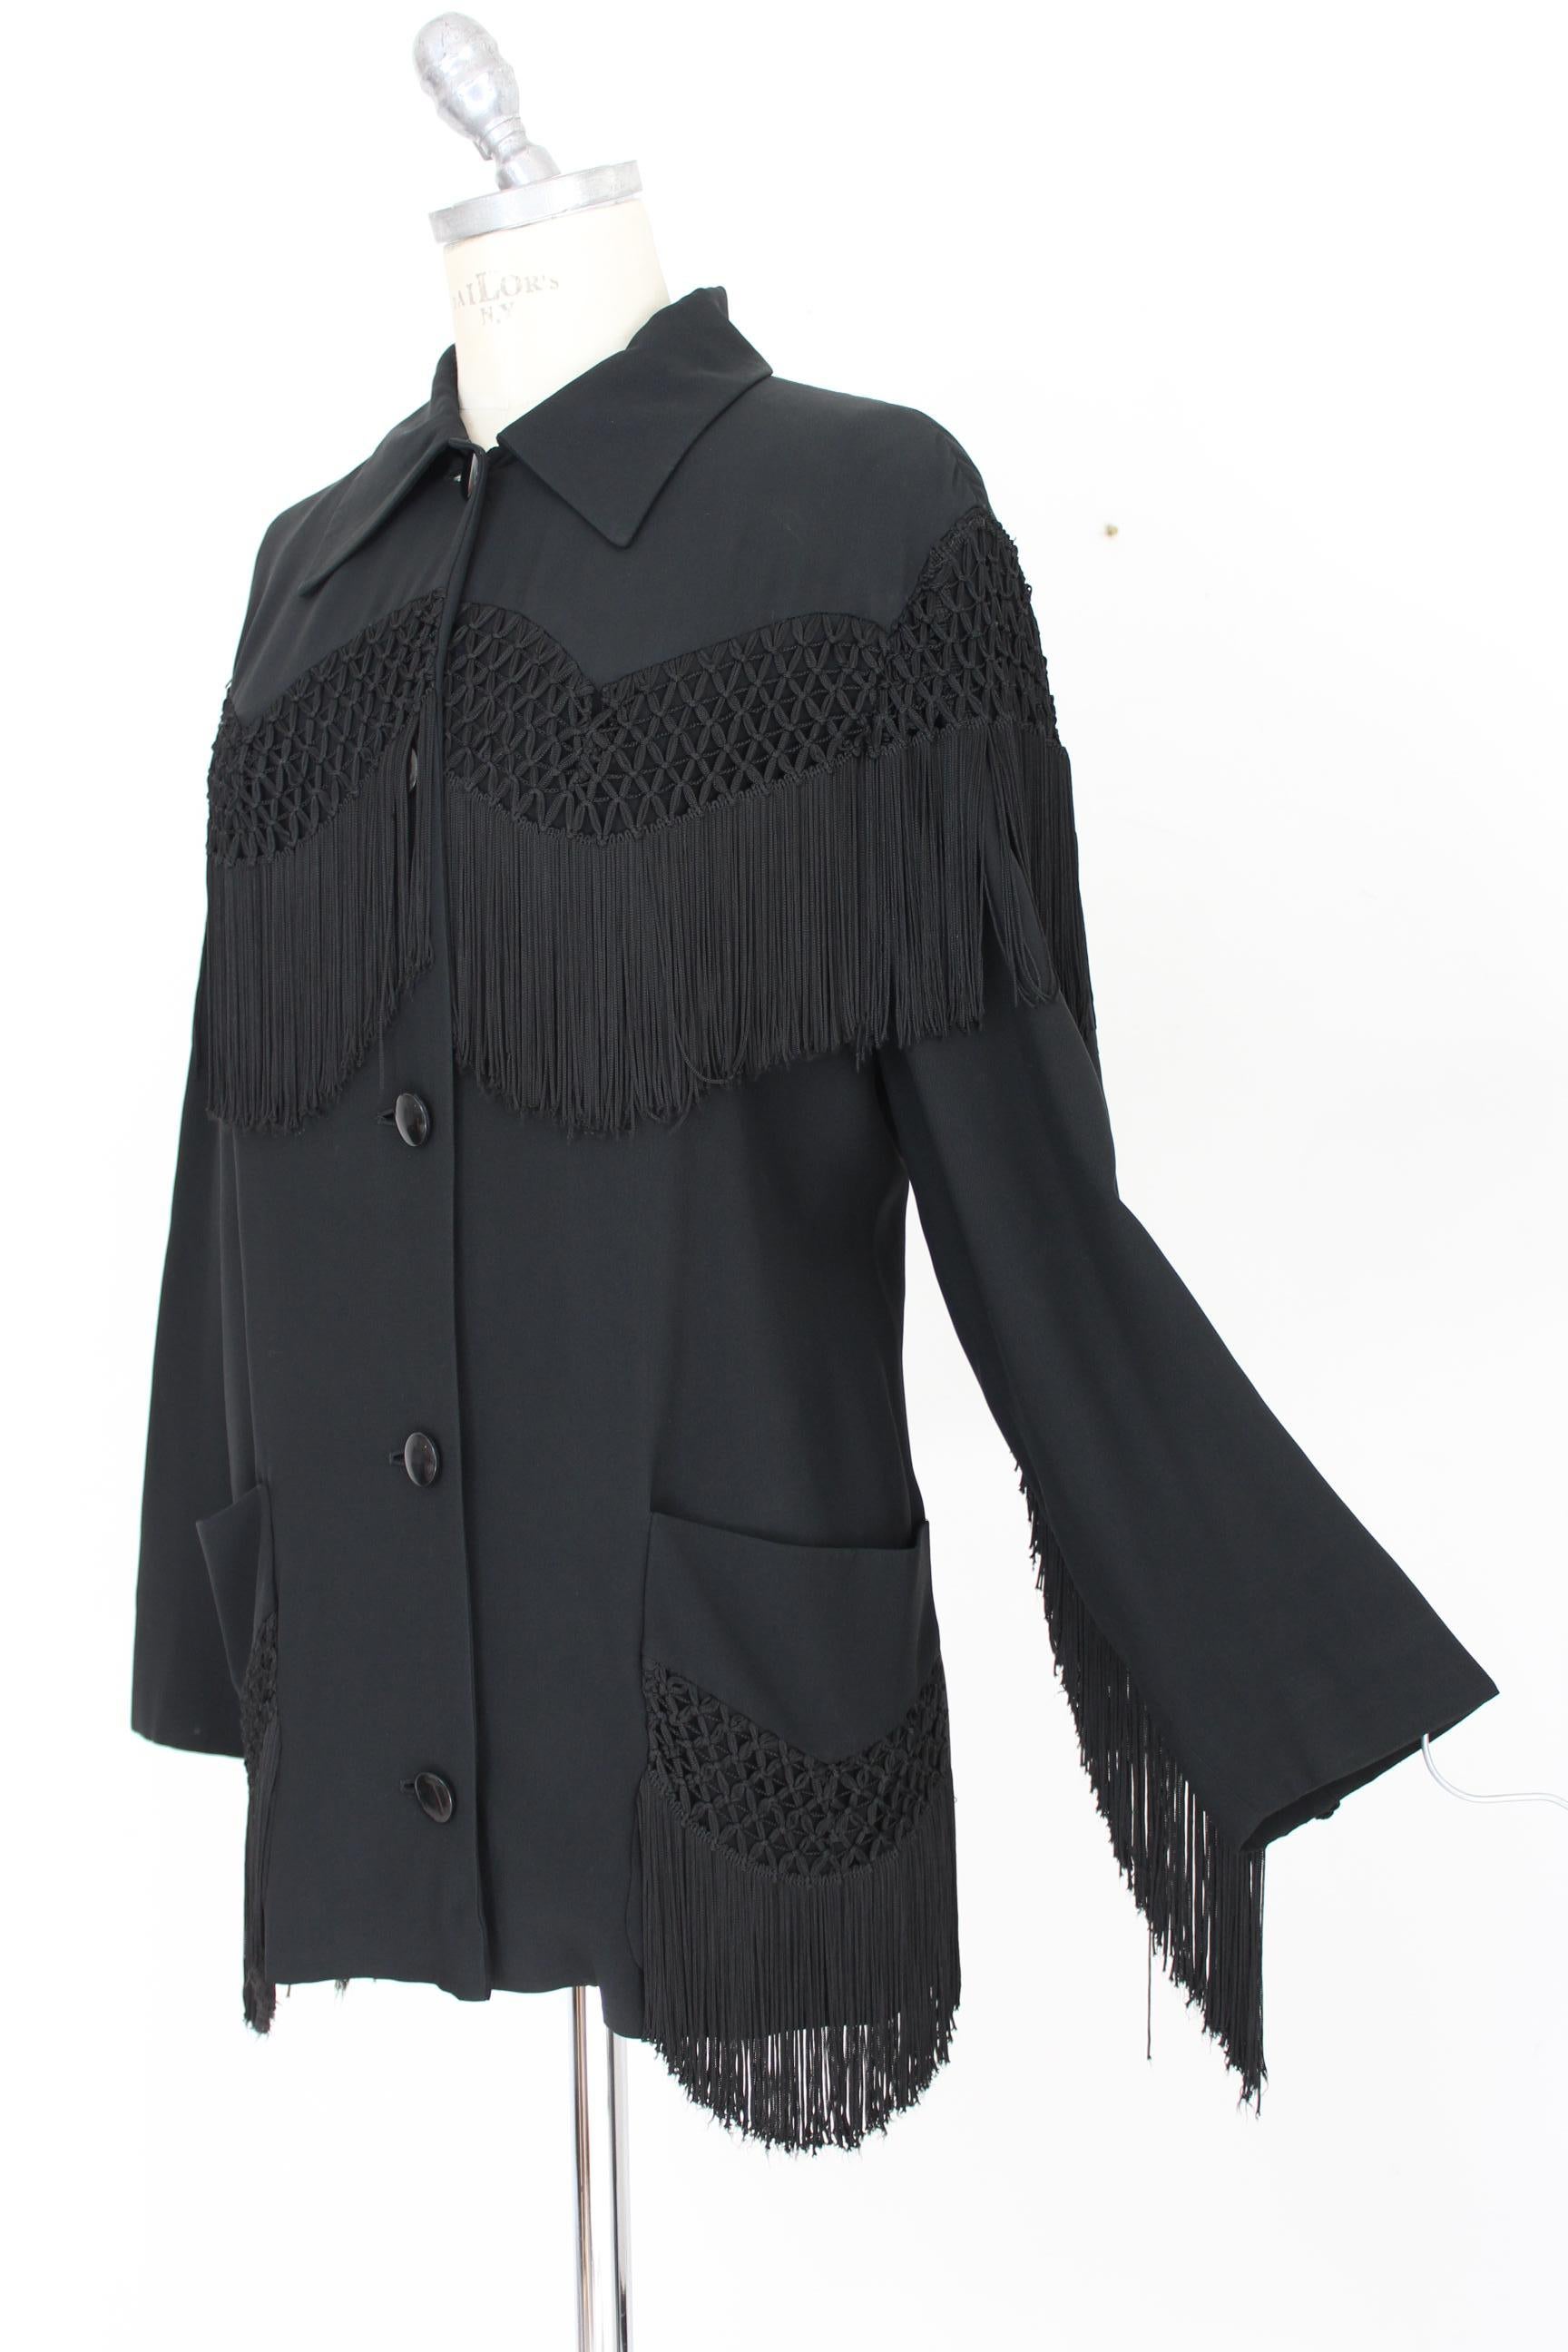 Moschino Couture Black Fringe Country Western Jacket 1980s In Good Condition In Brindisi, Bt